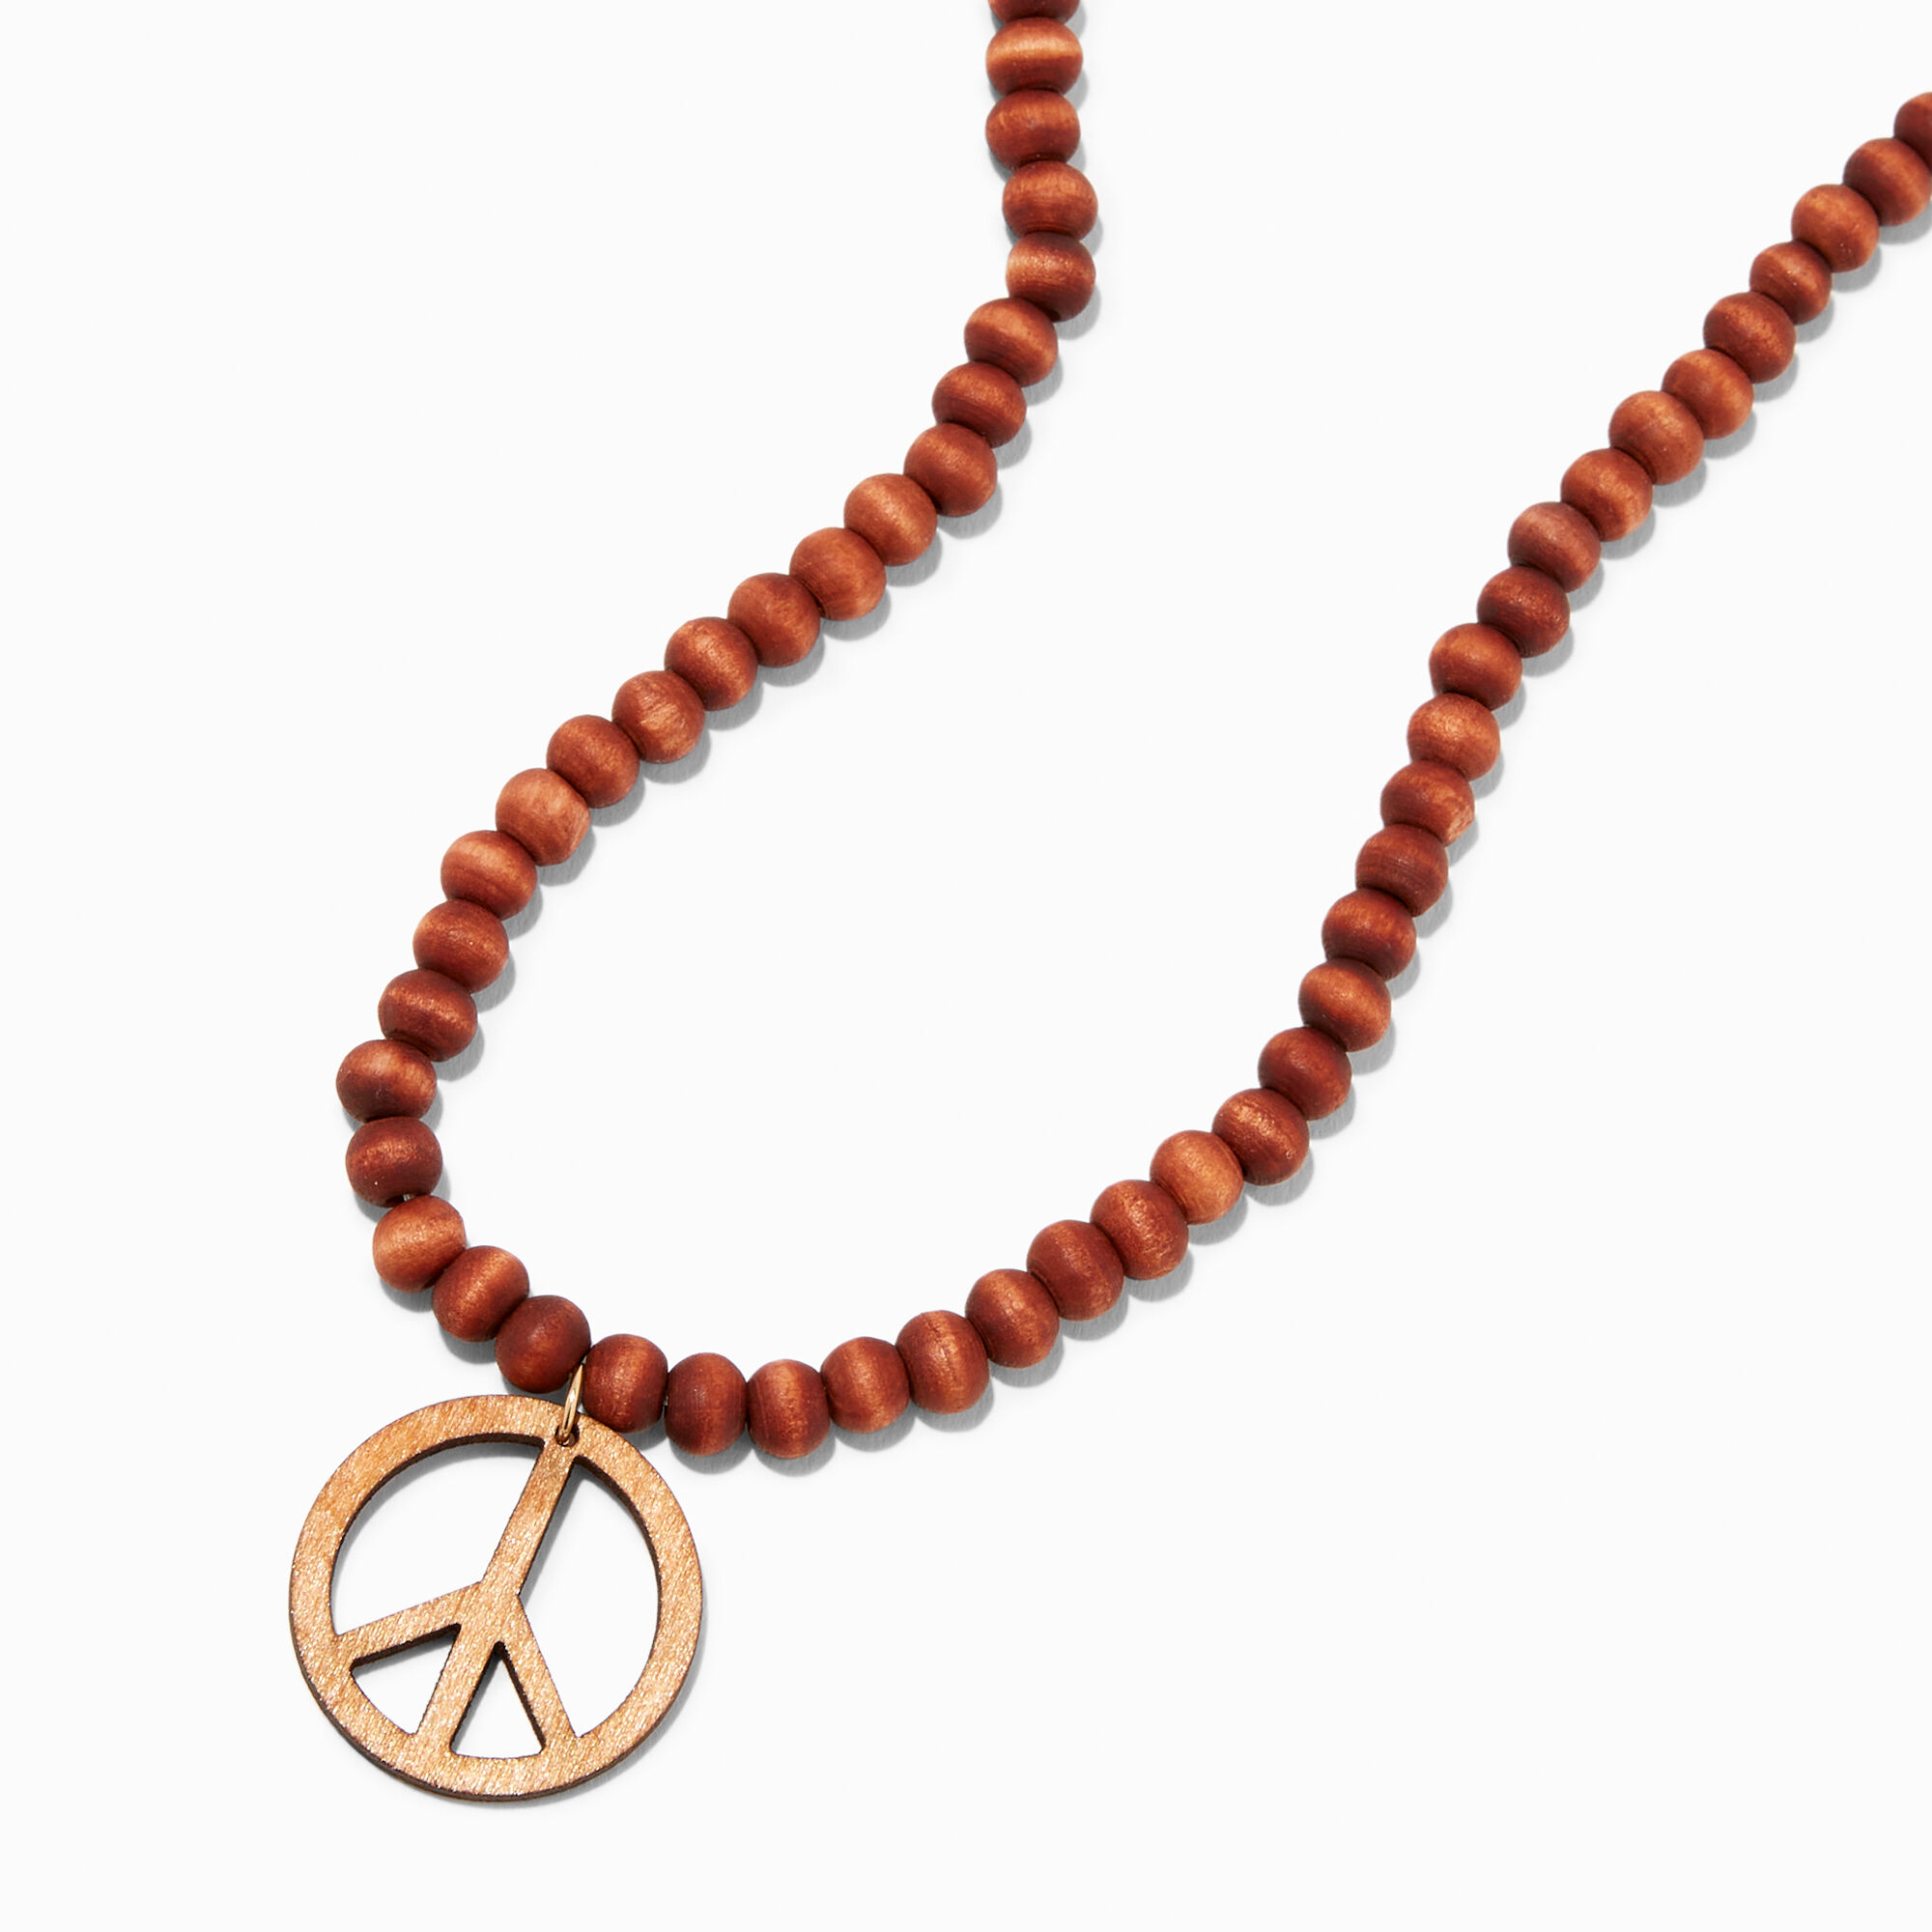 Buy Peace Sign Necklace, Replica of BTS Sugas Necklace Online in India -  Etsy